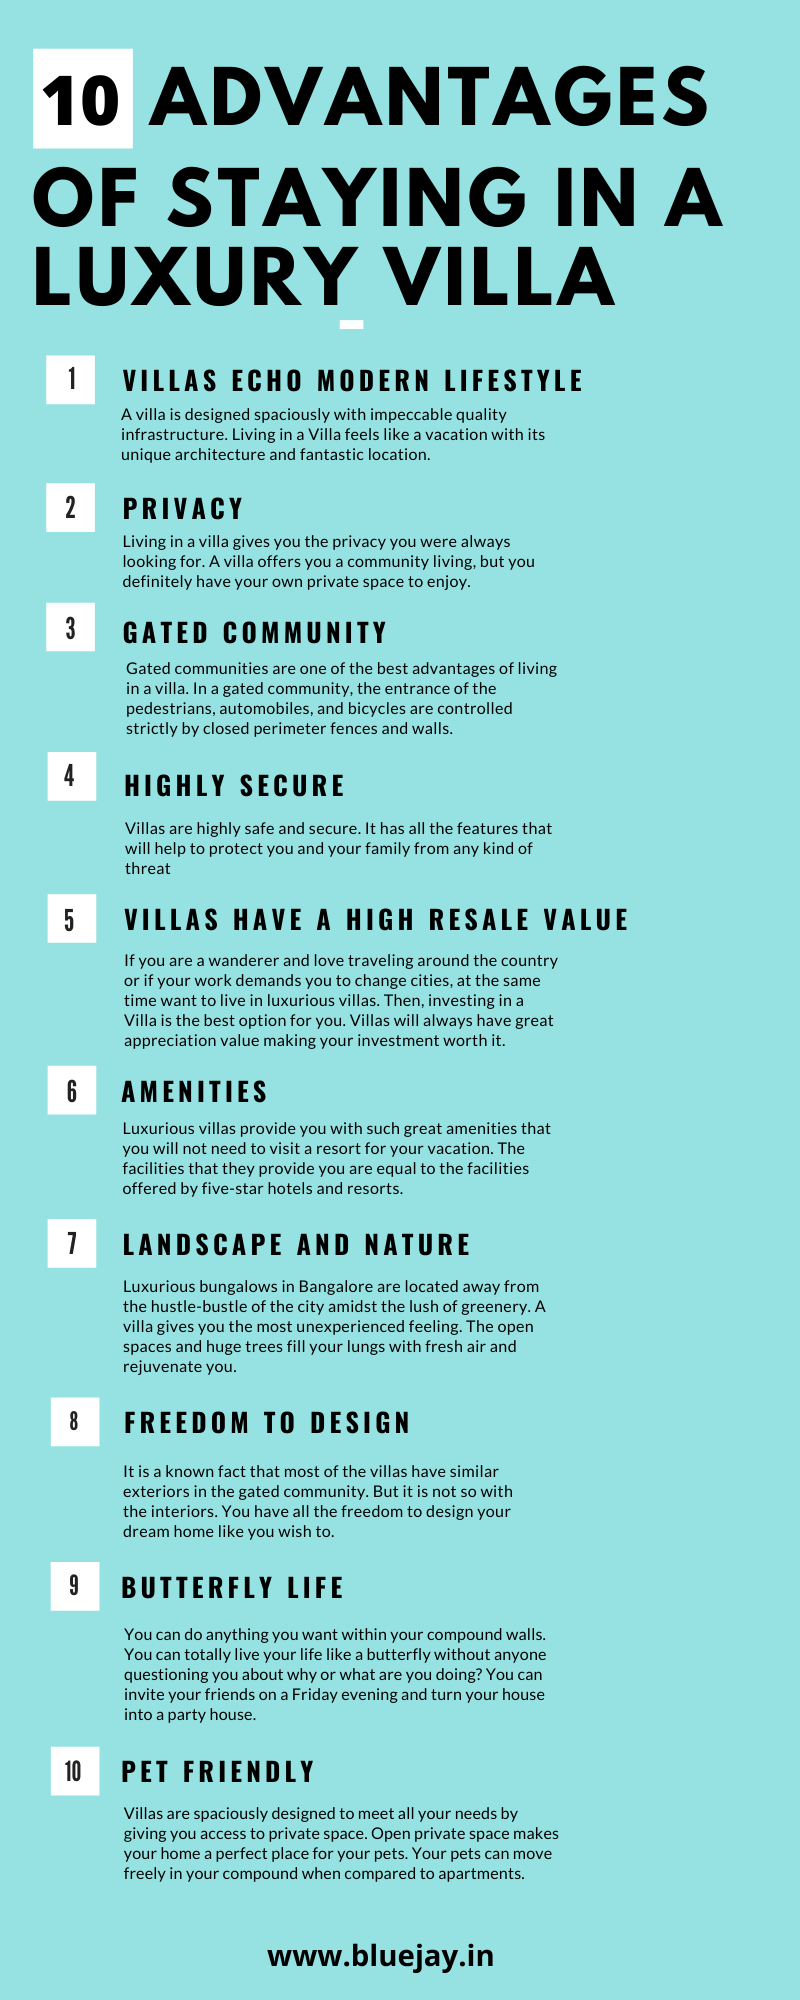 10 Advantages of staying in a luxury villa infographic